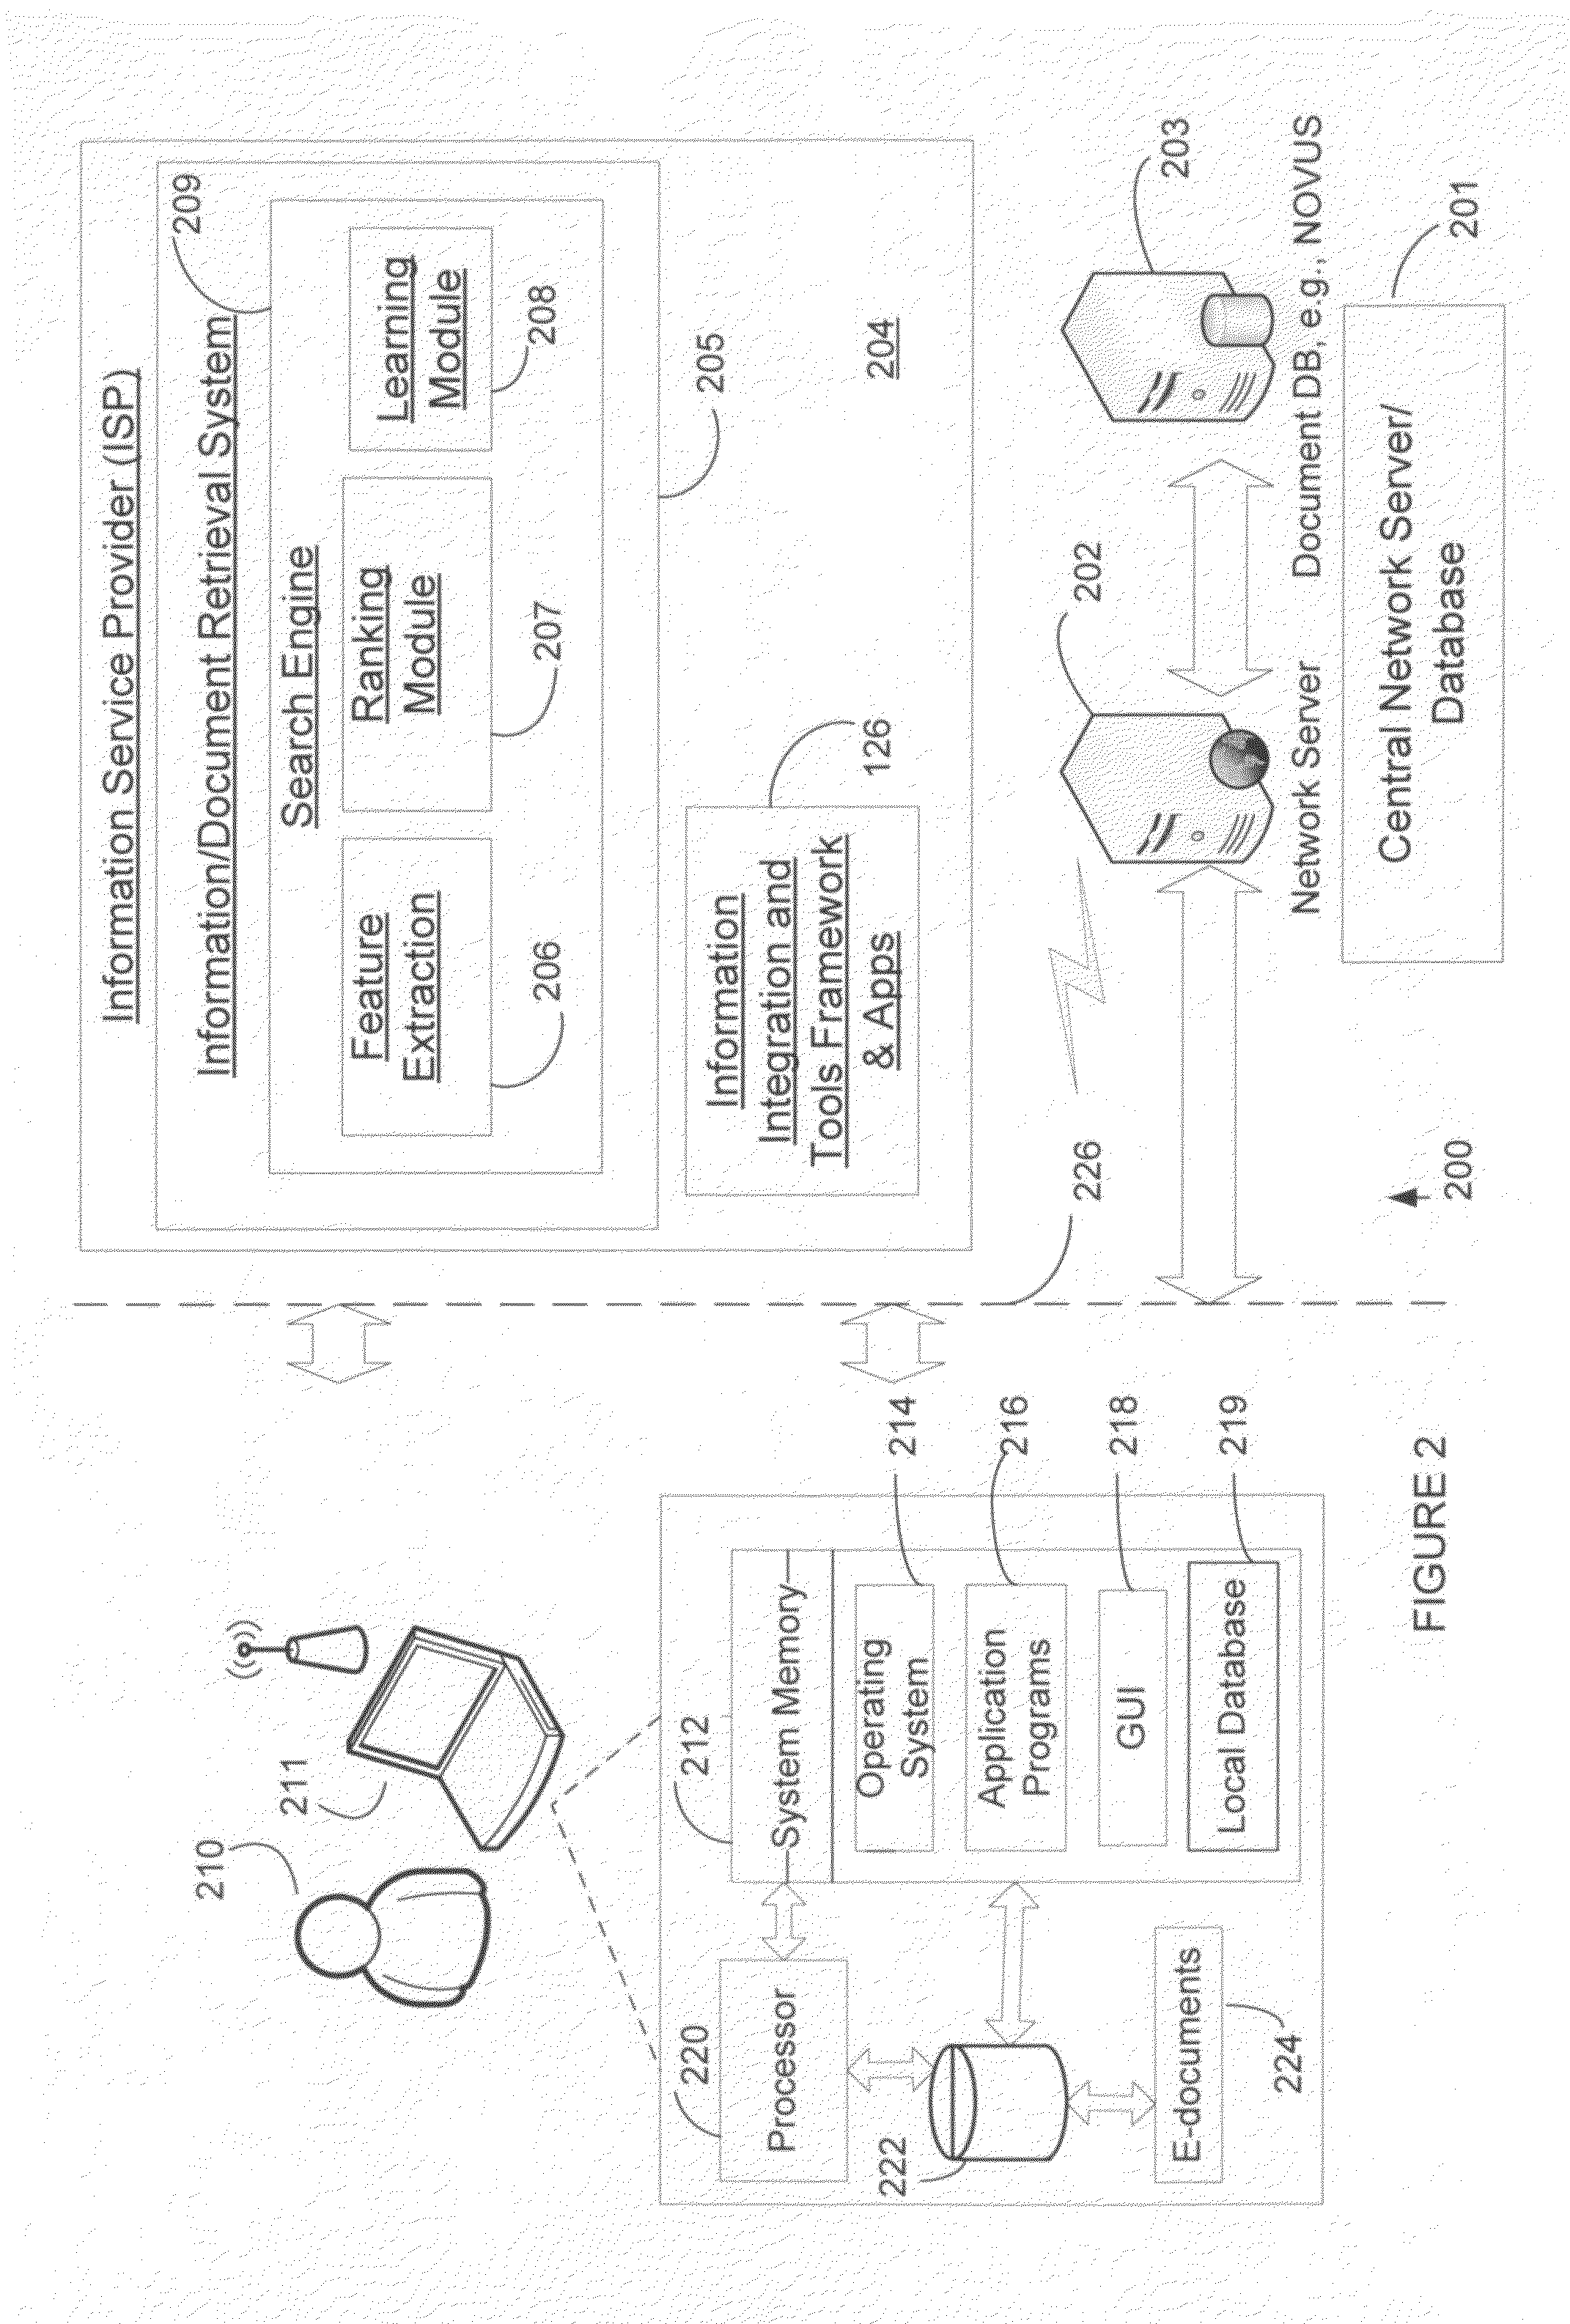 Method and system for integrating web-based systems with local document processing applications